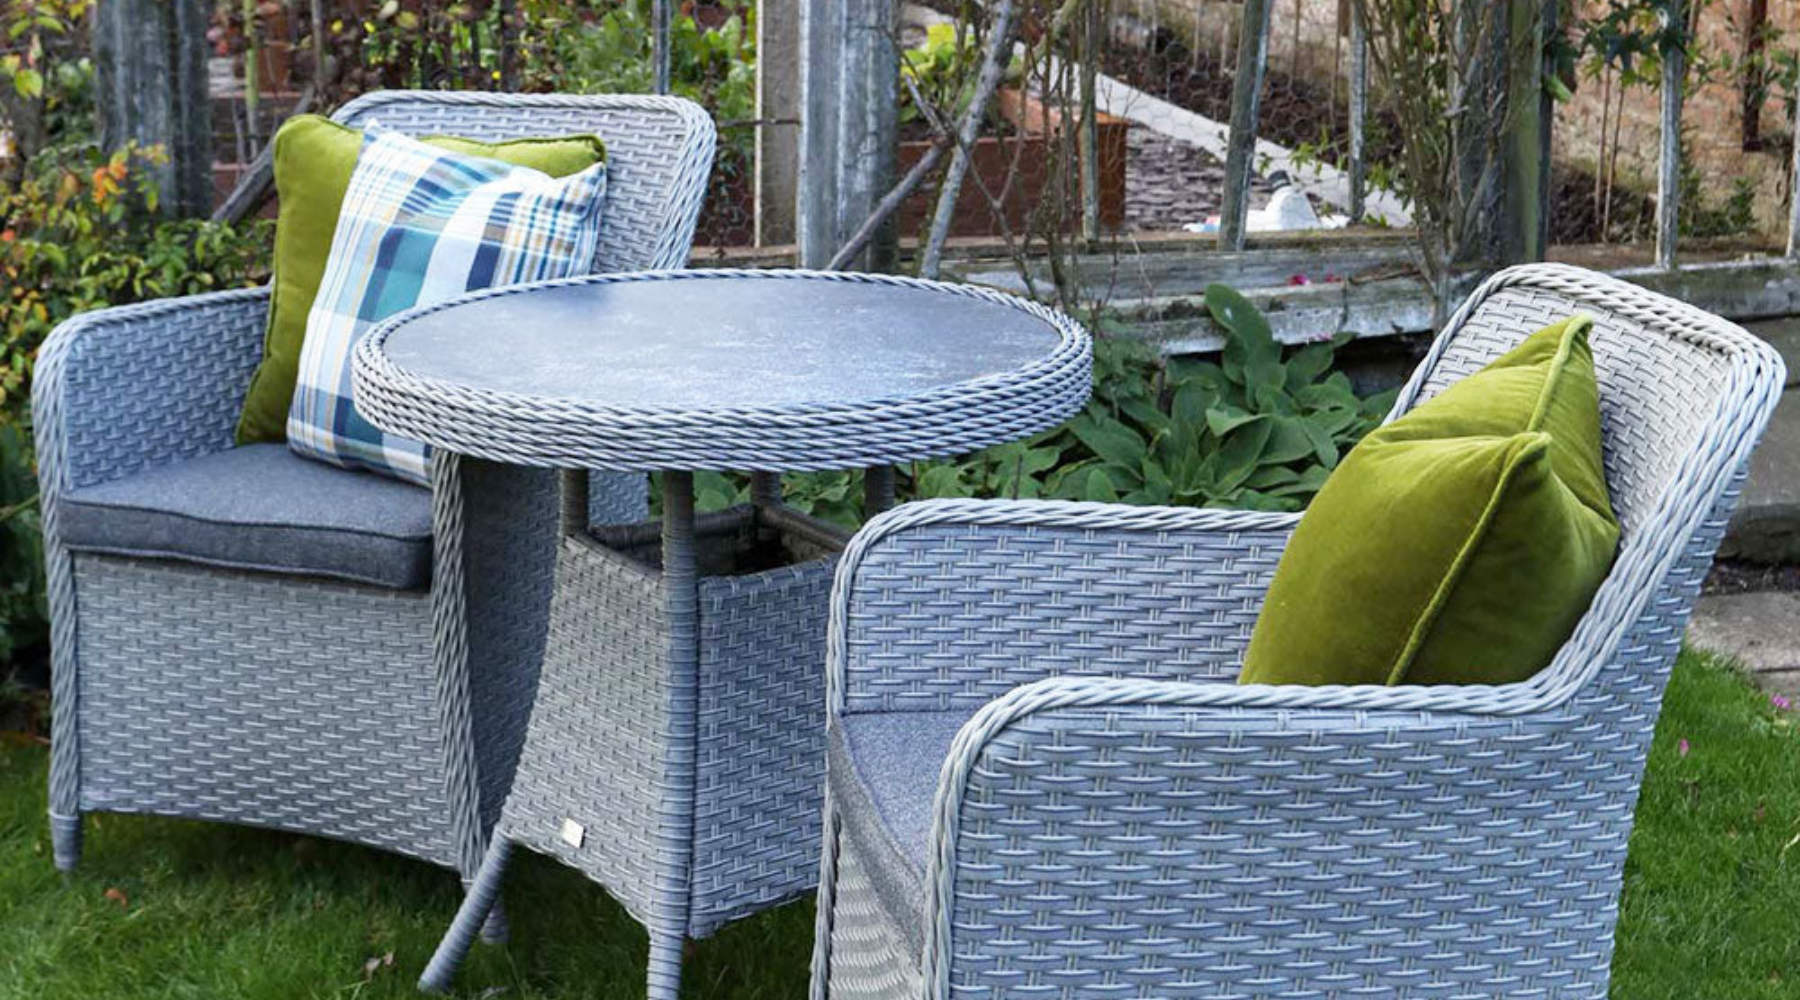 Garden Furniture for Small Gardens - Making the Most of Your Space